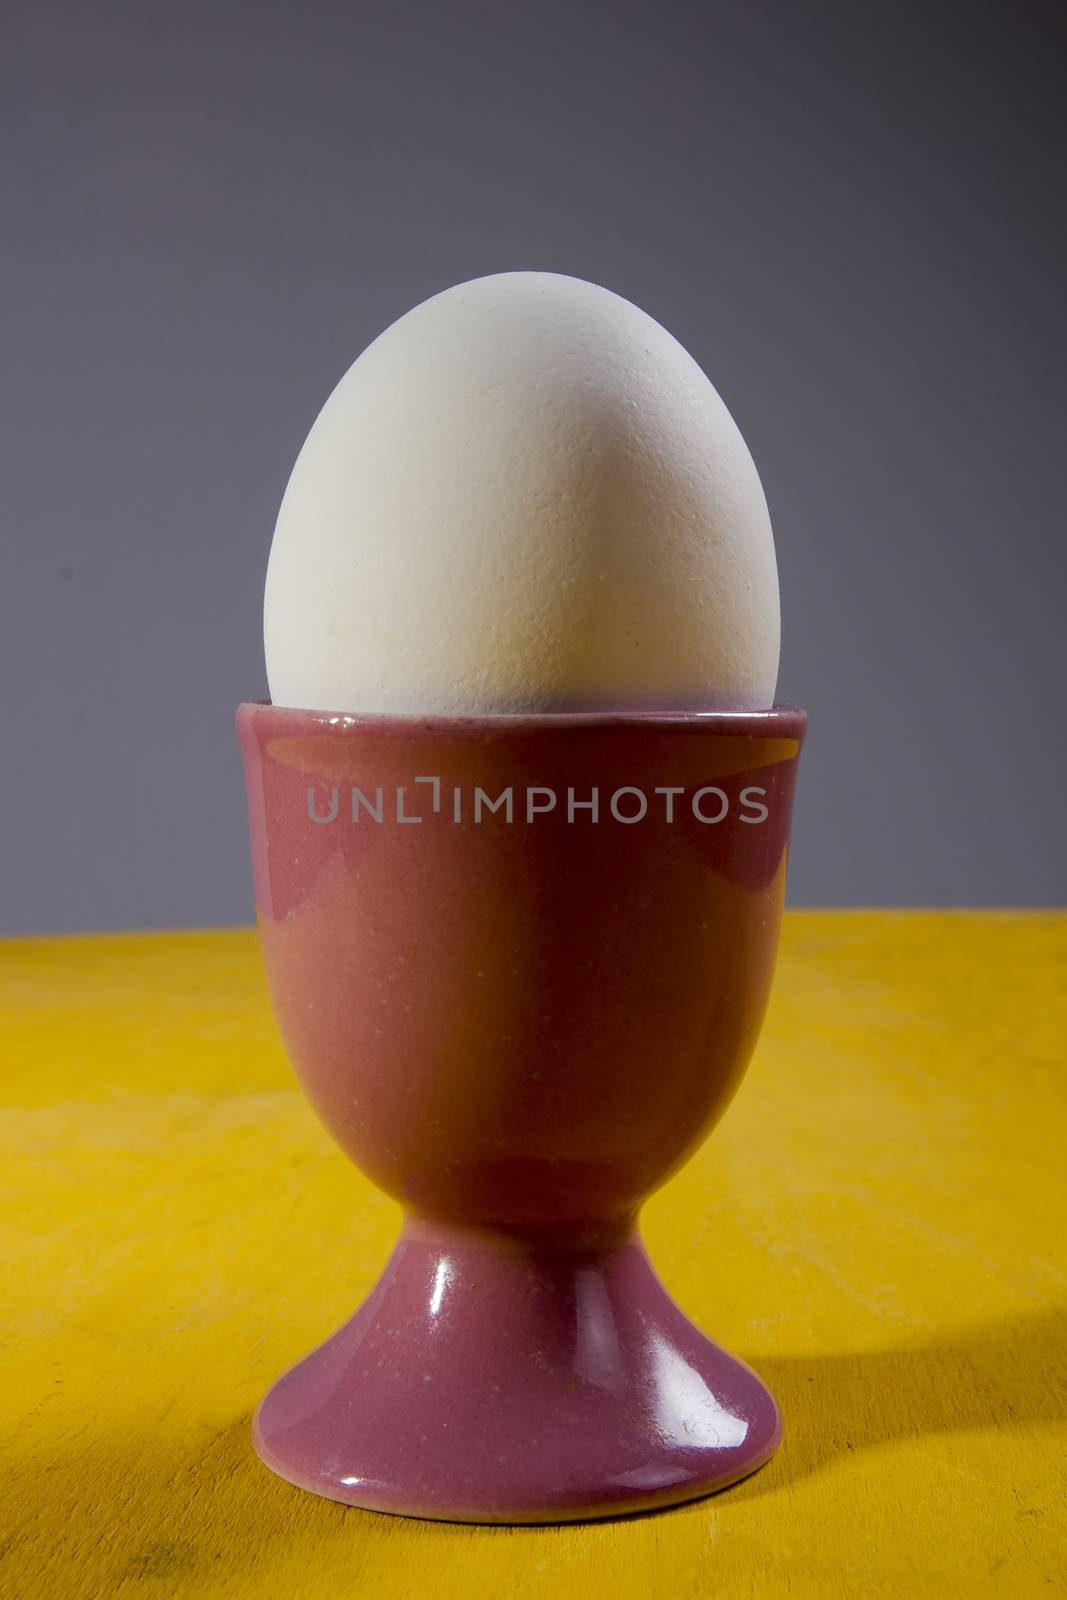 Cooked egg in a holder on a wooden table